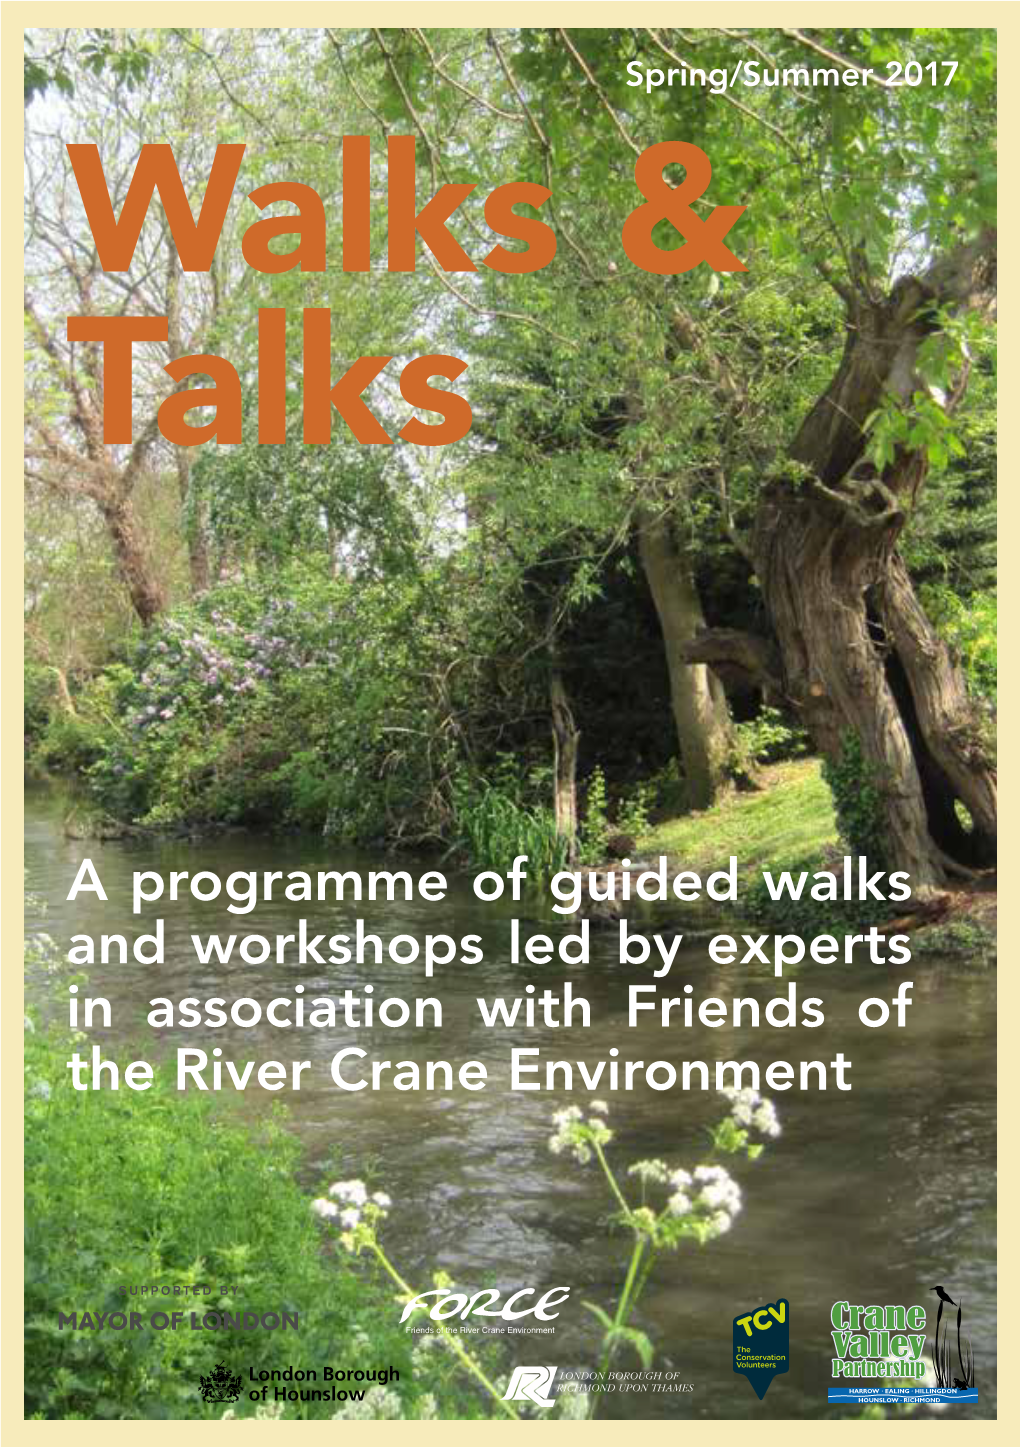 A Programme of Guided Walks and Workshops Led by Experts in Association with Friends of the River Crane Environment